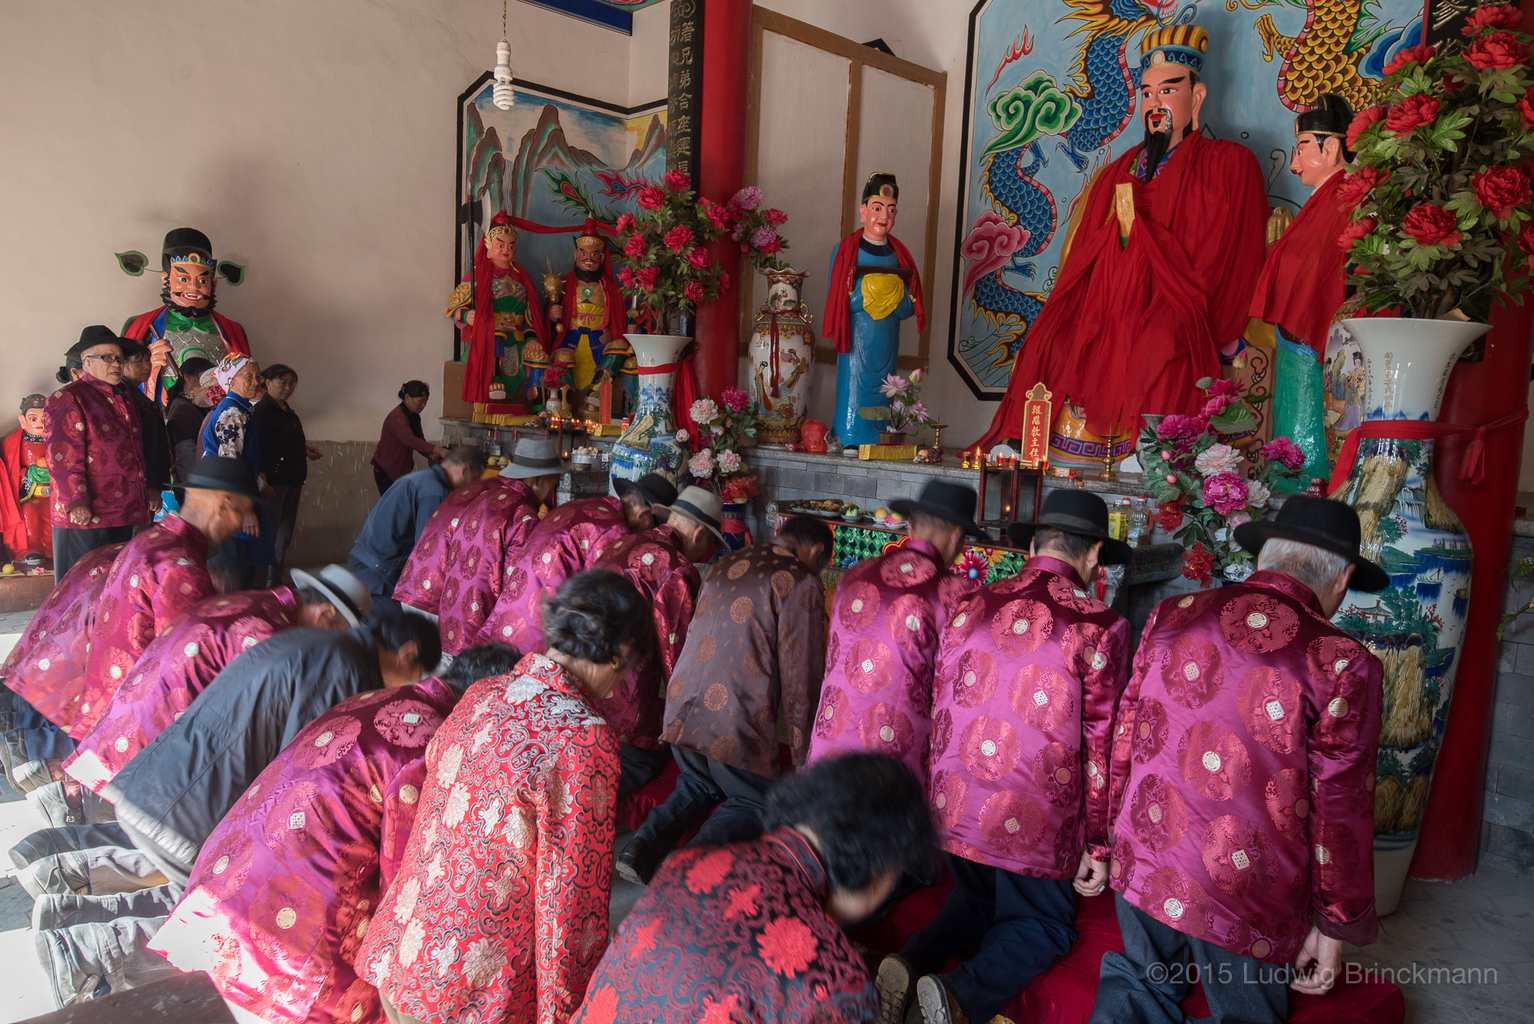 Picture: Ancient Daoist temple music performed in Dali.